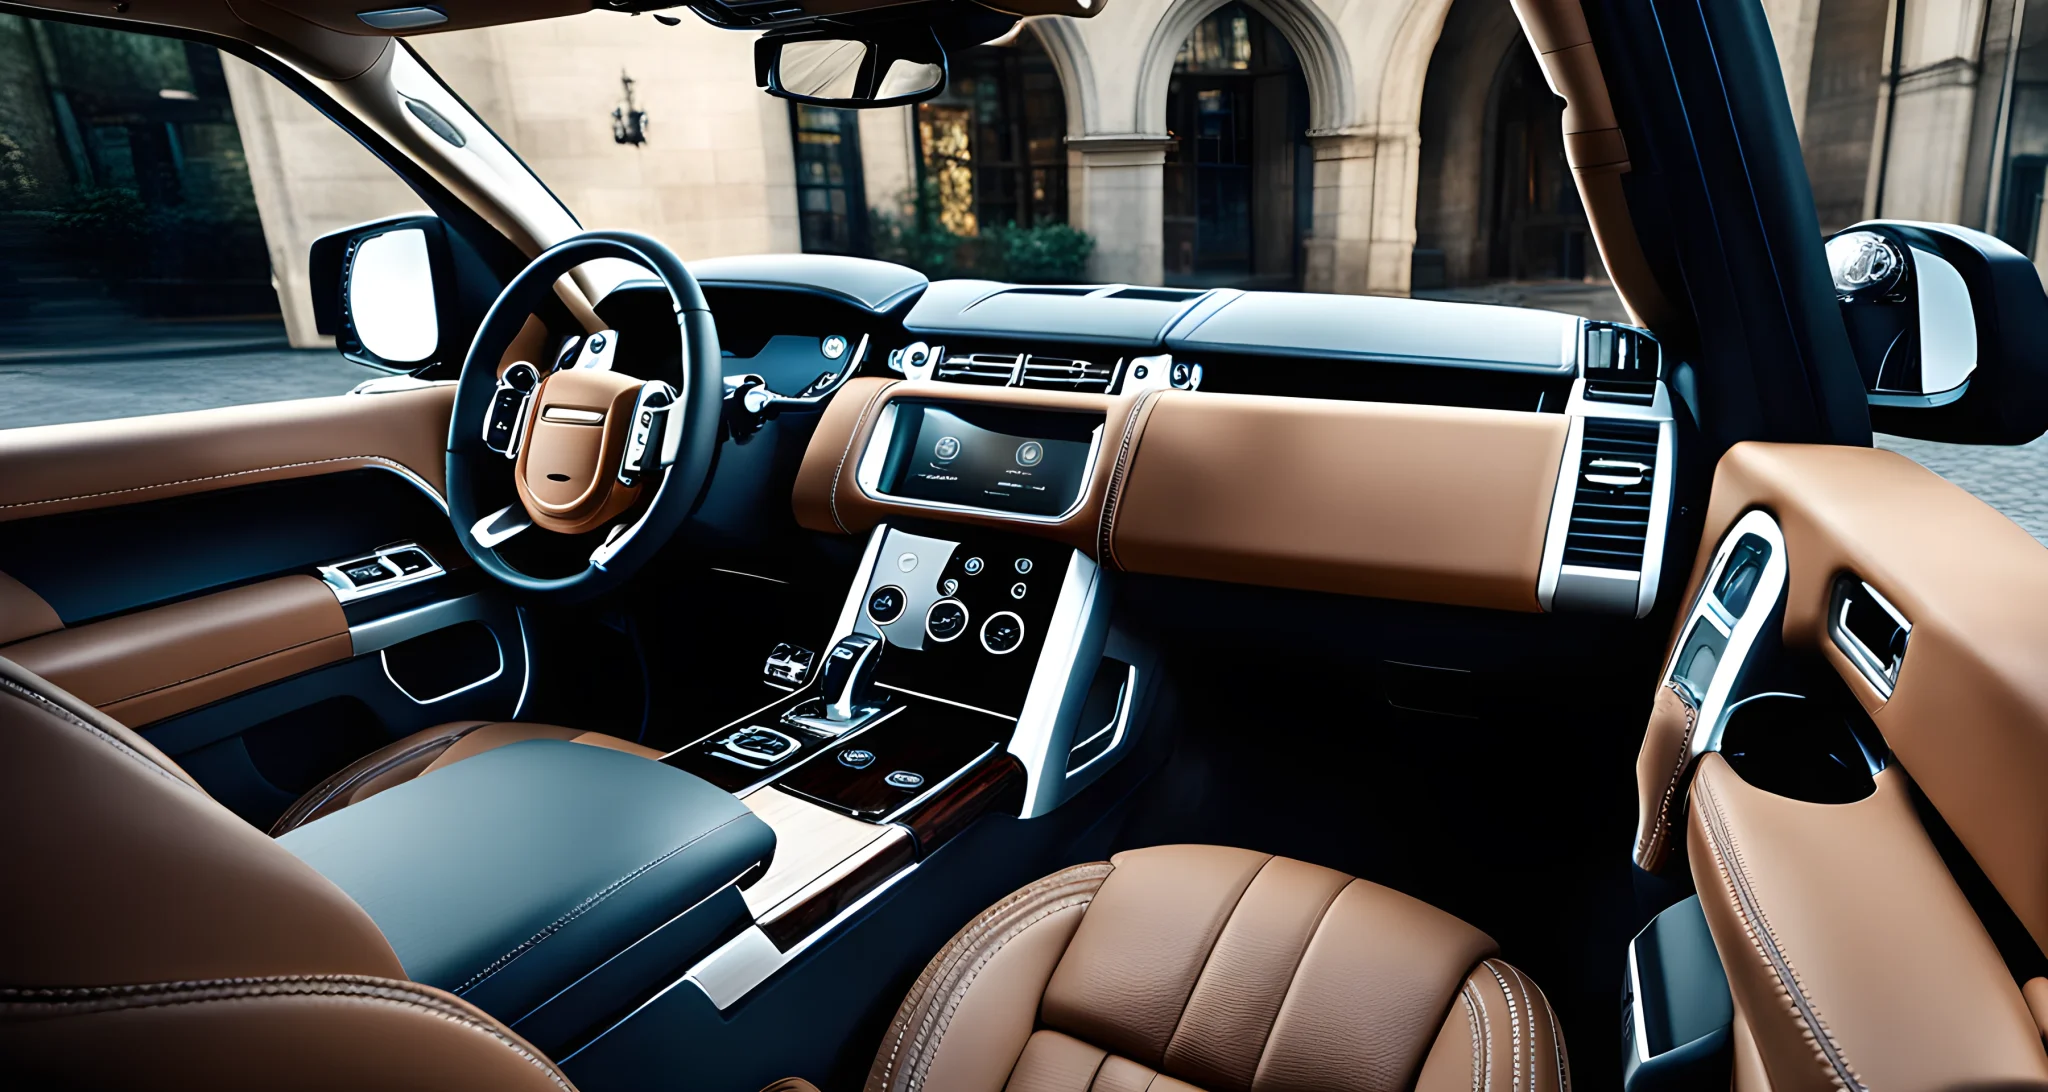 The image shows the interior of a Land Rover luxury car with plush leather seats, polished wood trim, and a state-of-the-art infotainment system.